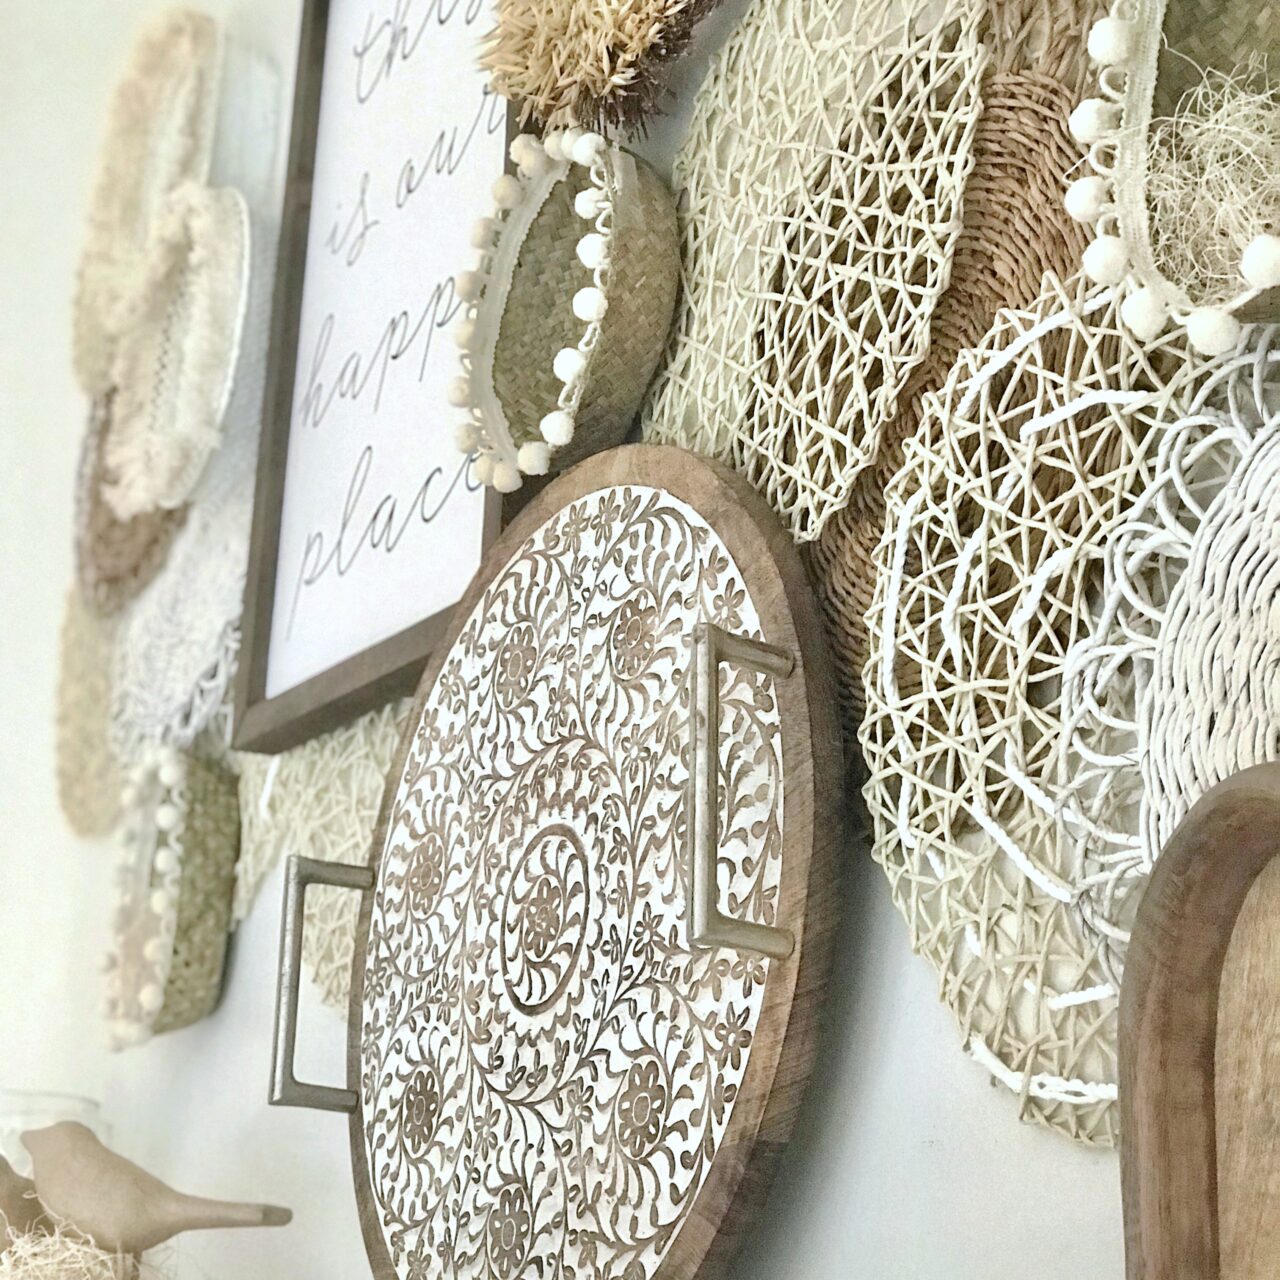 baskets, trays and other wicker/woven items hung over a white mantel.